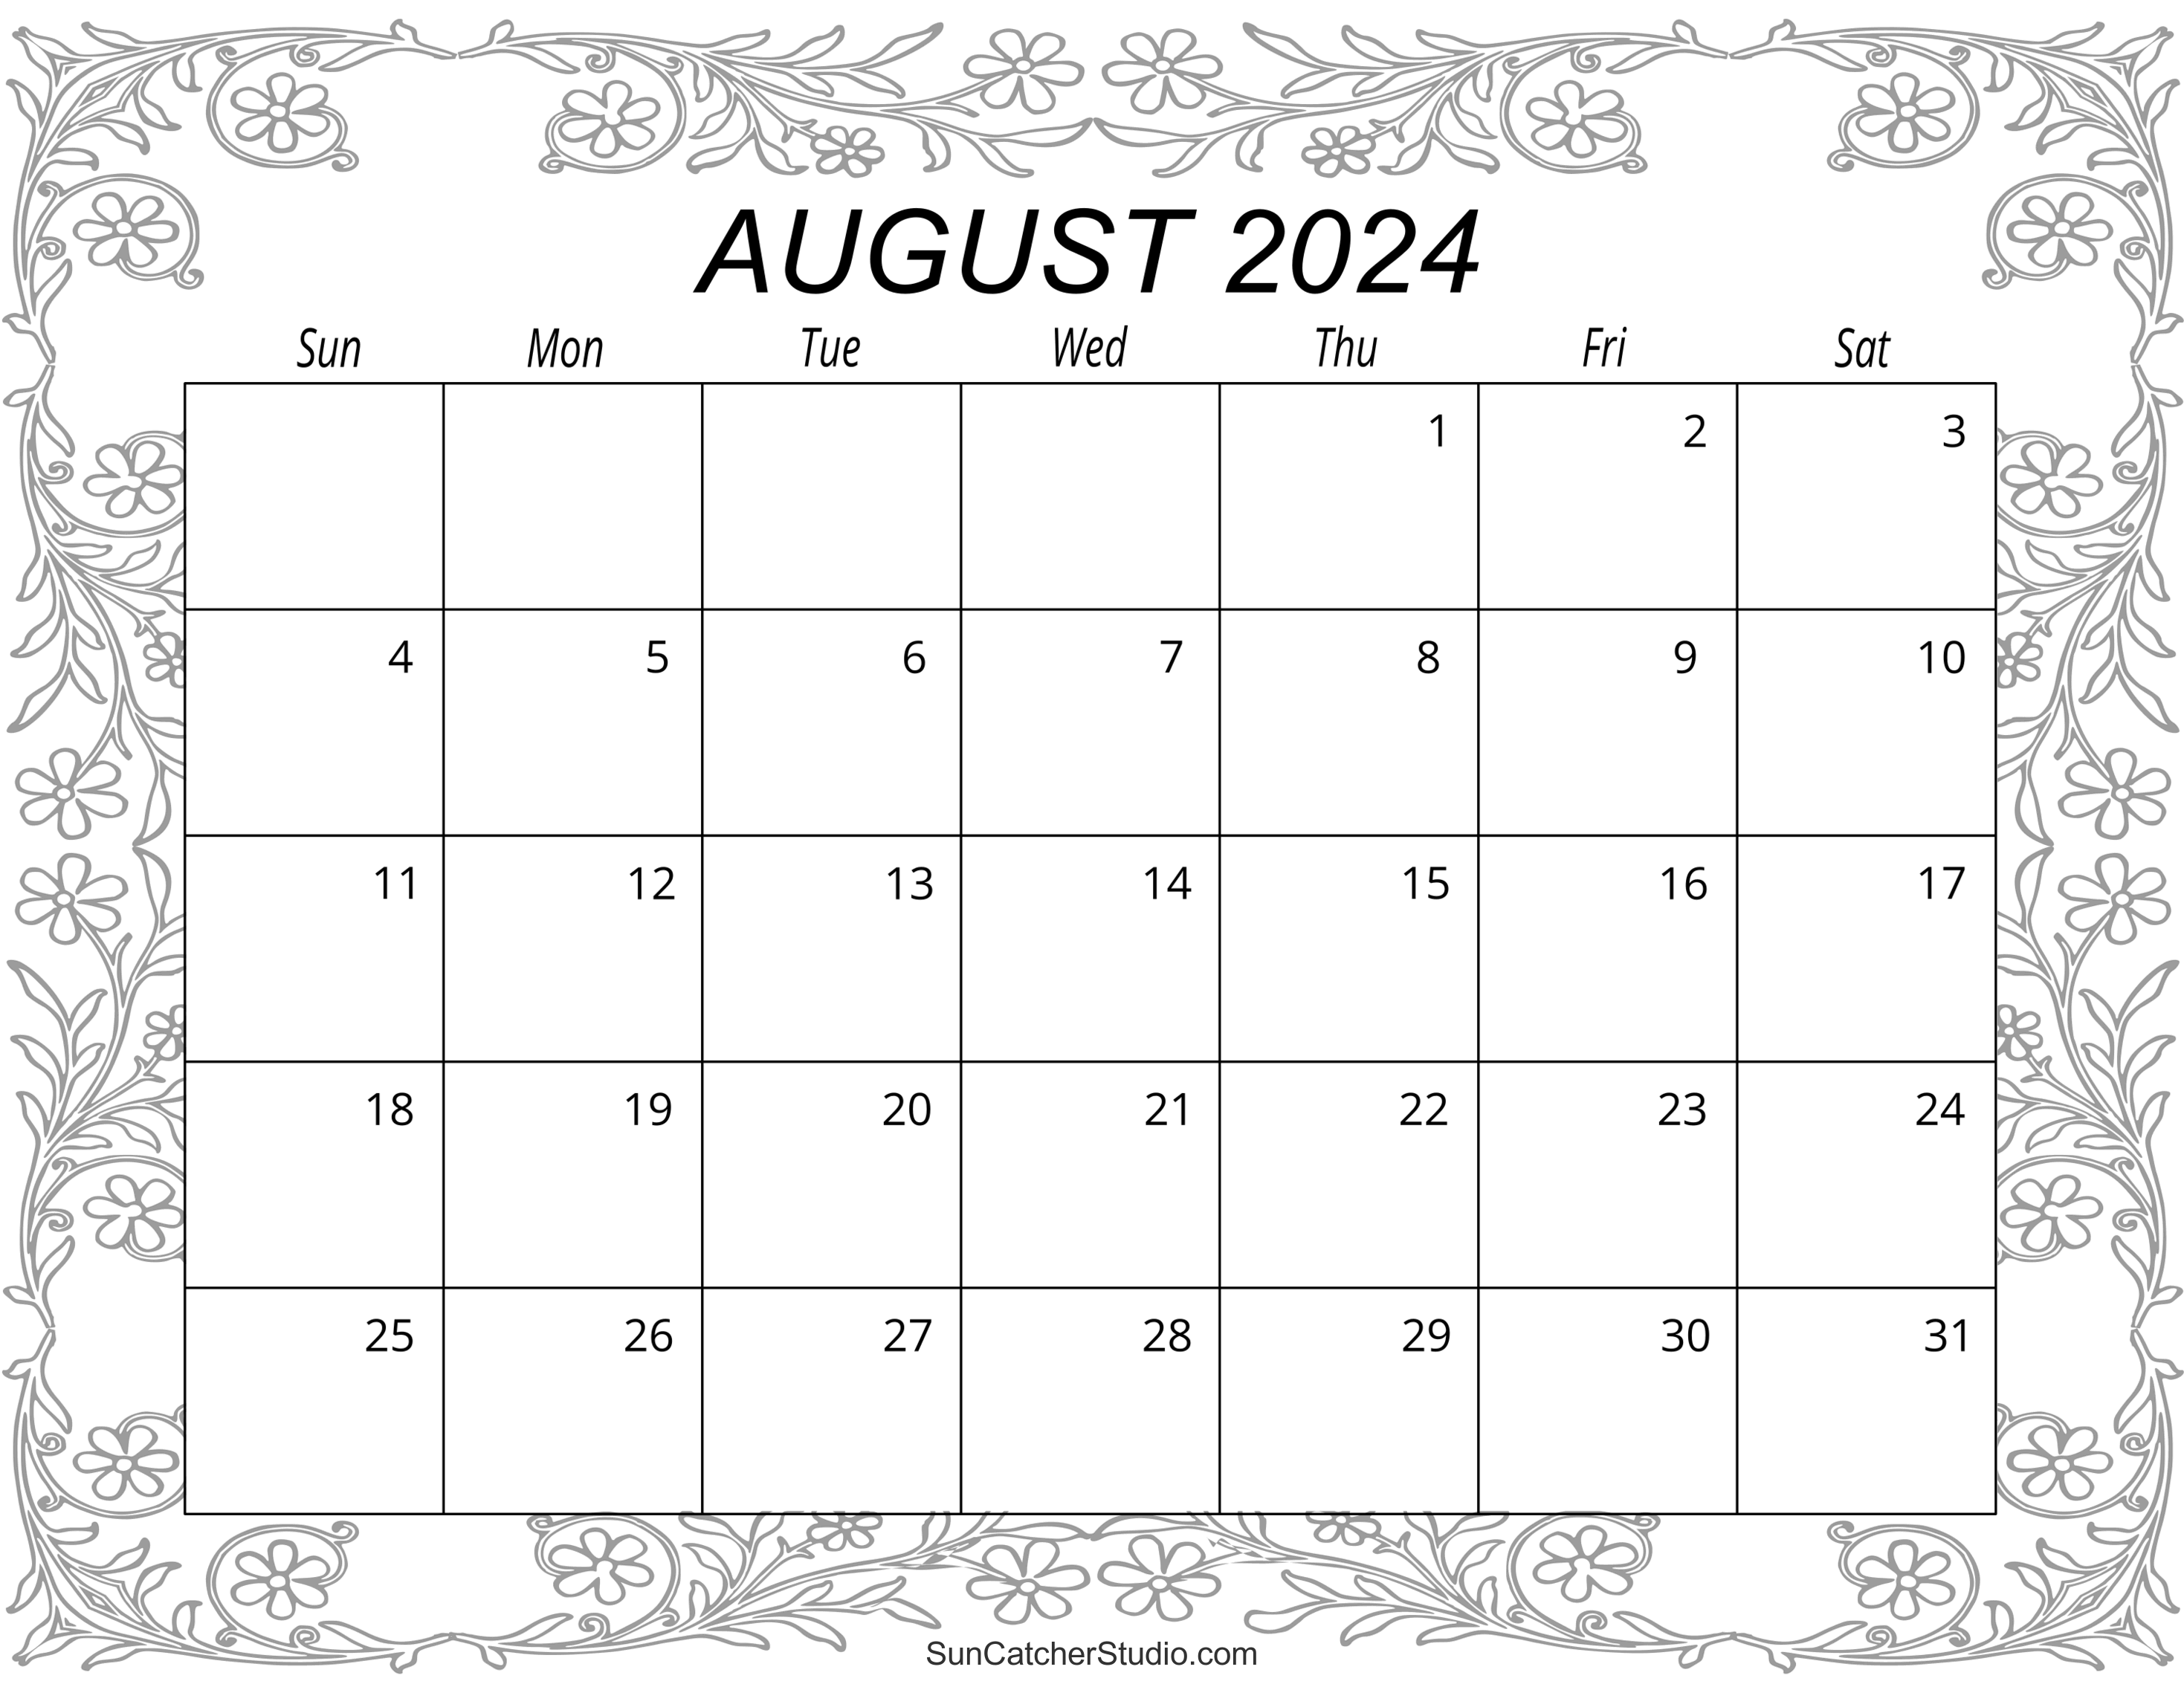 August 2024 Calendar (Free Printable) DIY Projects, Patterns